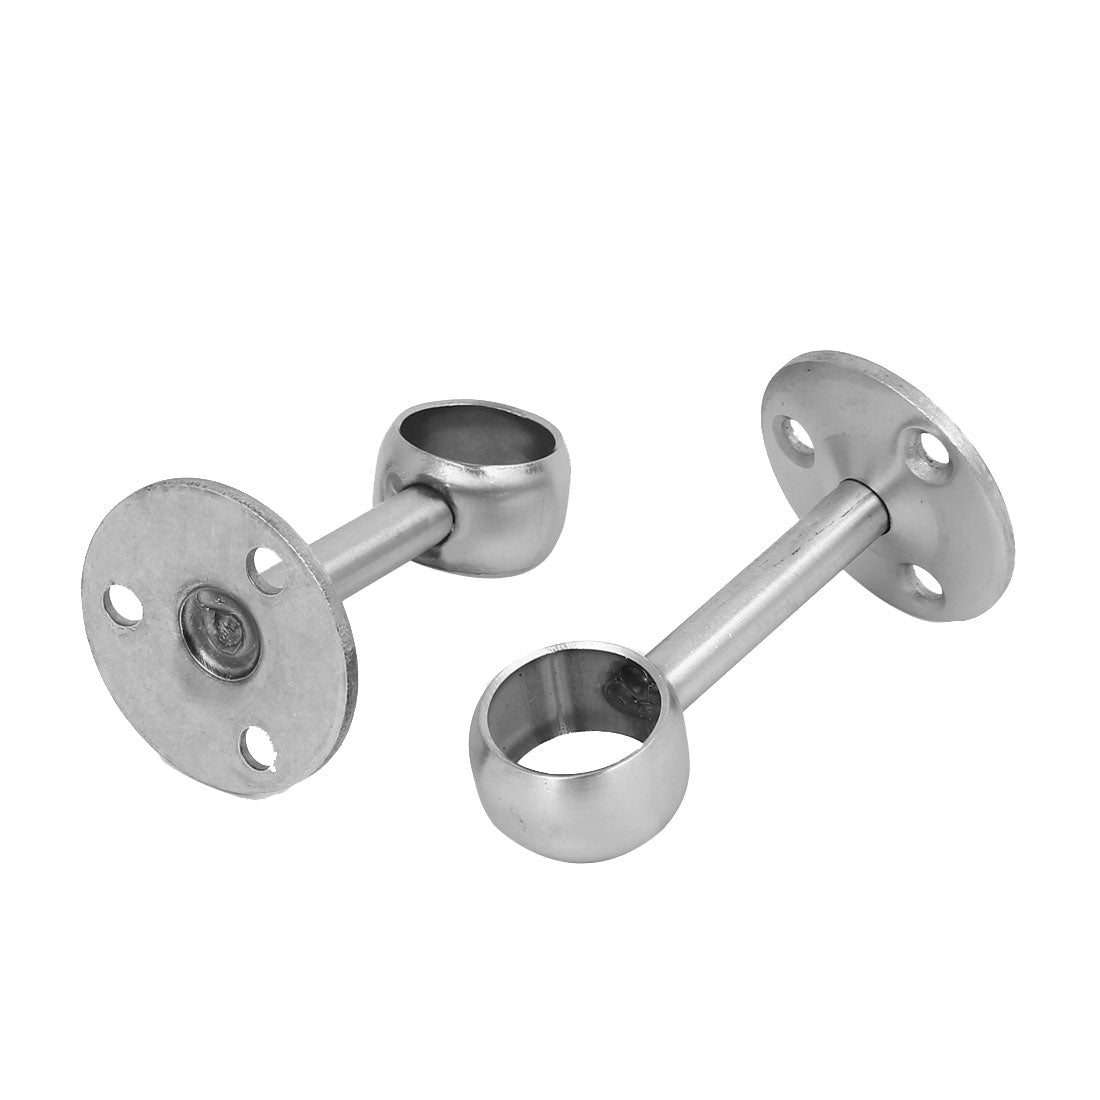 uxcell Uxcell 20mm Dia Rod Round Base Rail End Center Clothes Lever Bracket 2pcs